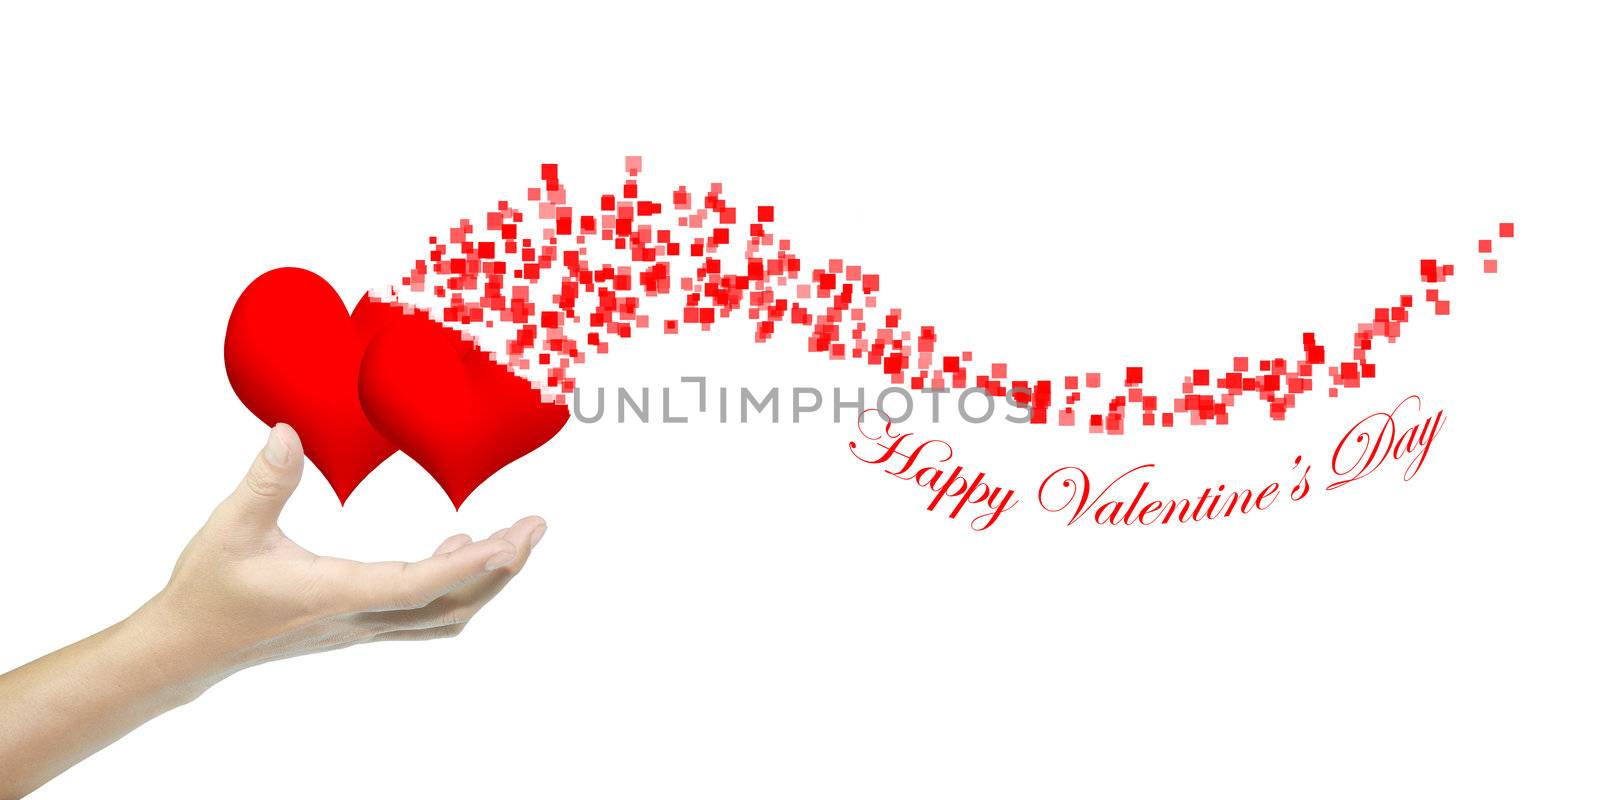 Hand hold heart as Valentine's day card by thampapon